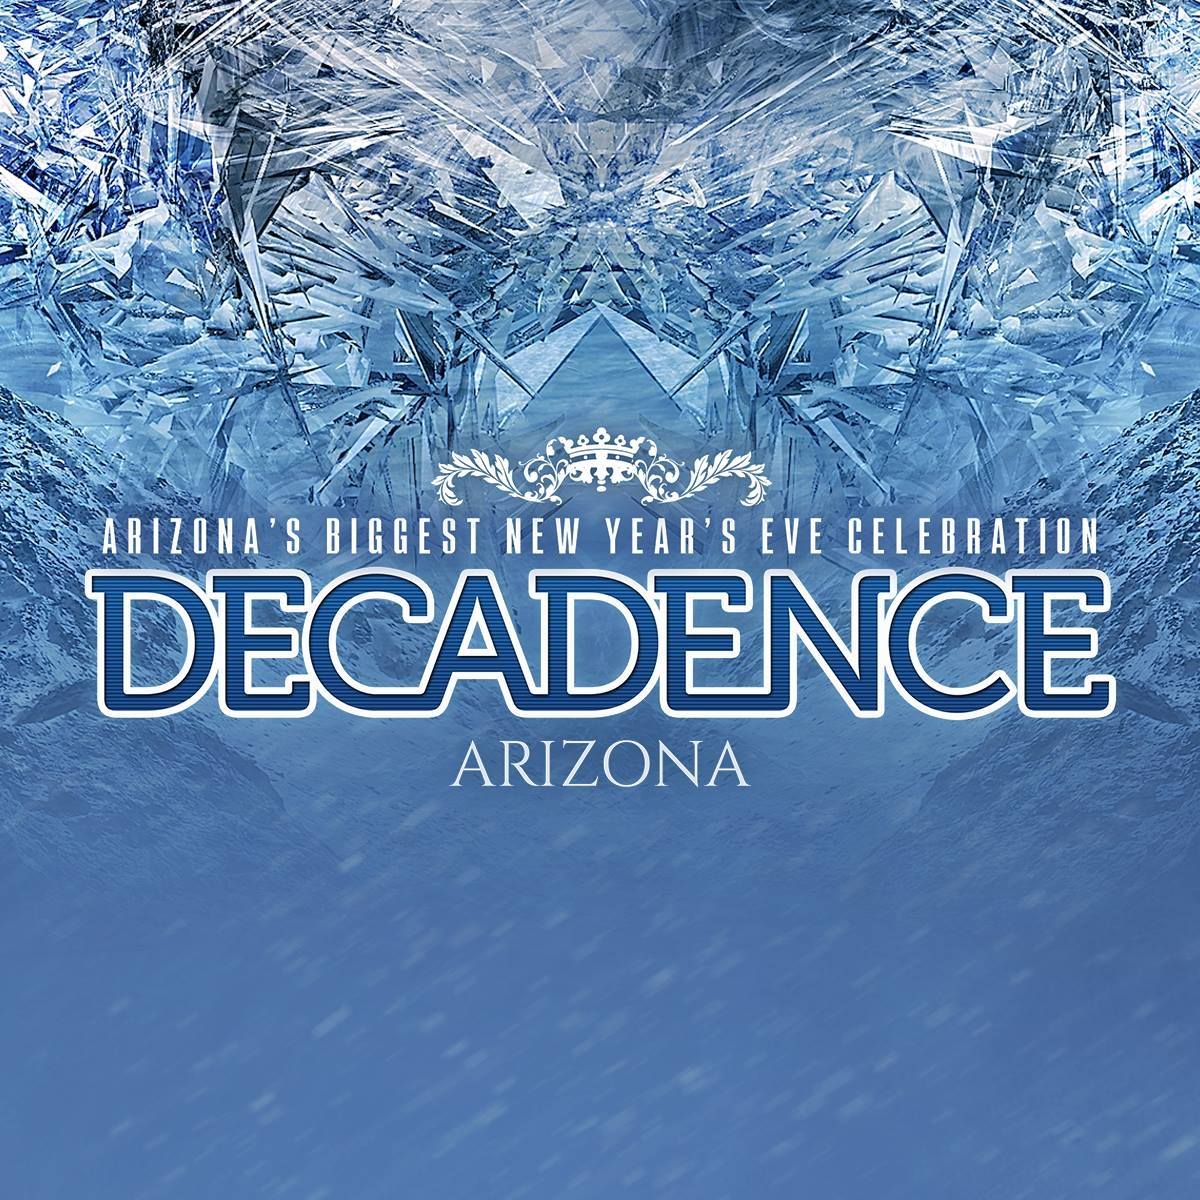 decadence-arizona-reveals-set-times-who-will-you-be-ringing-in-the